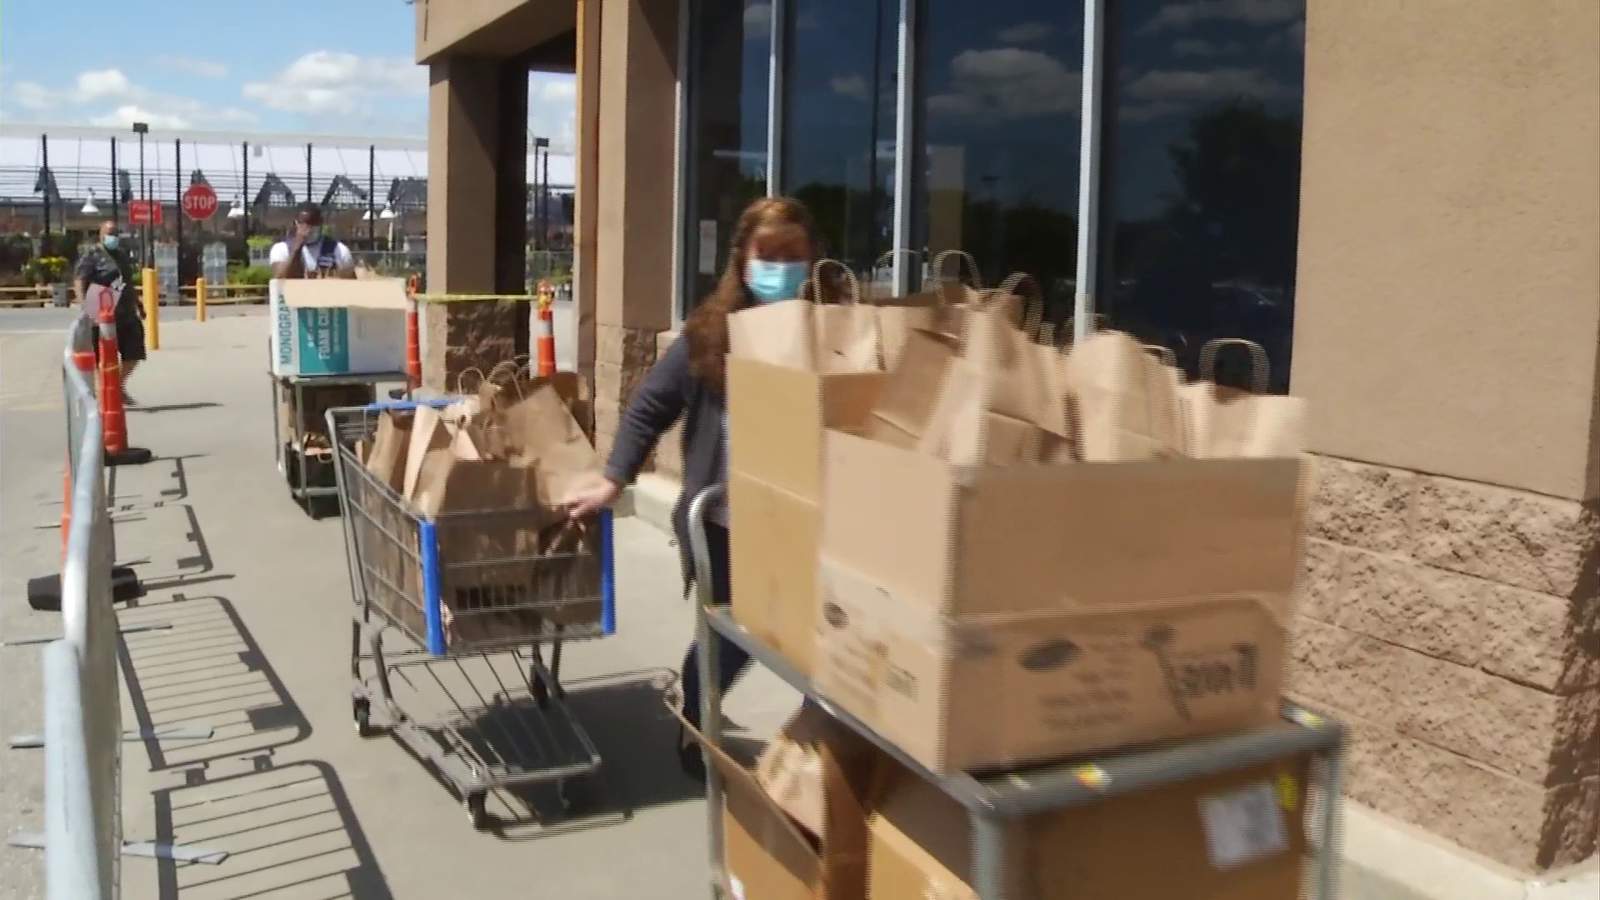 Bonsack Walmart employees receive dozens of lunches thanks to Food for Frontline donations